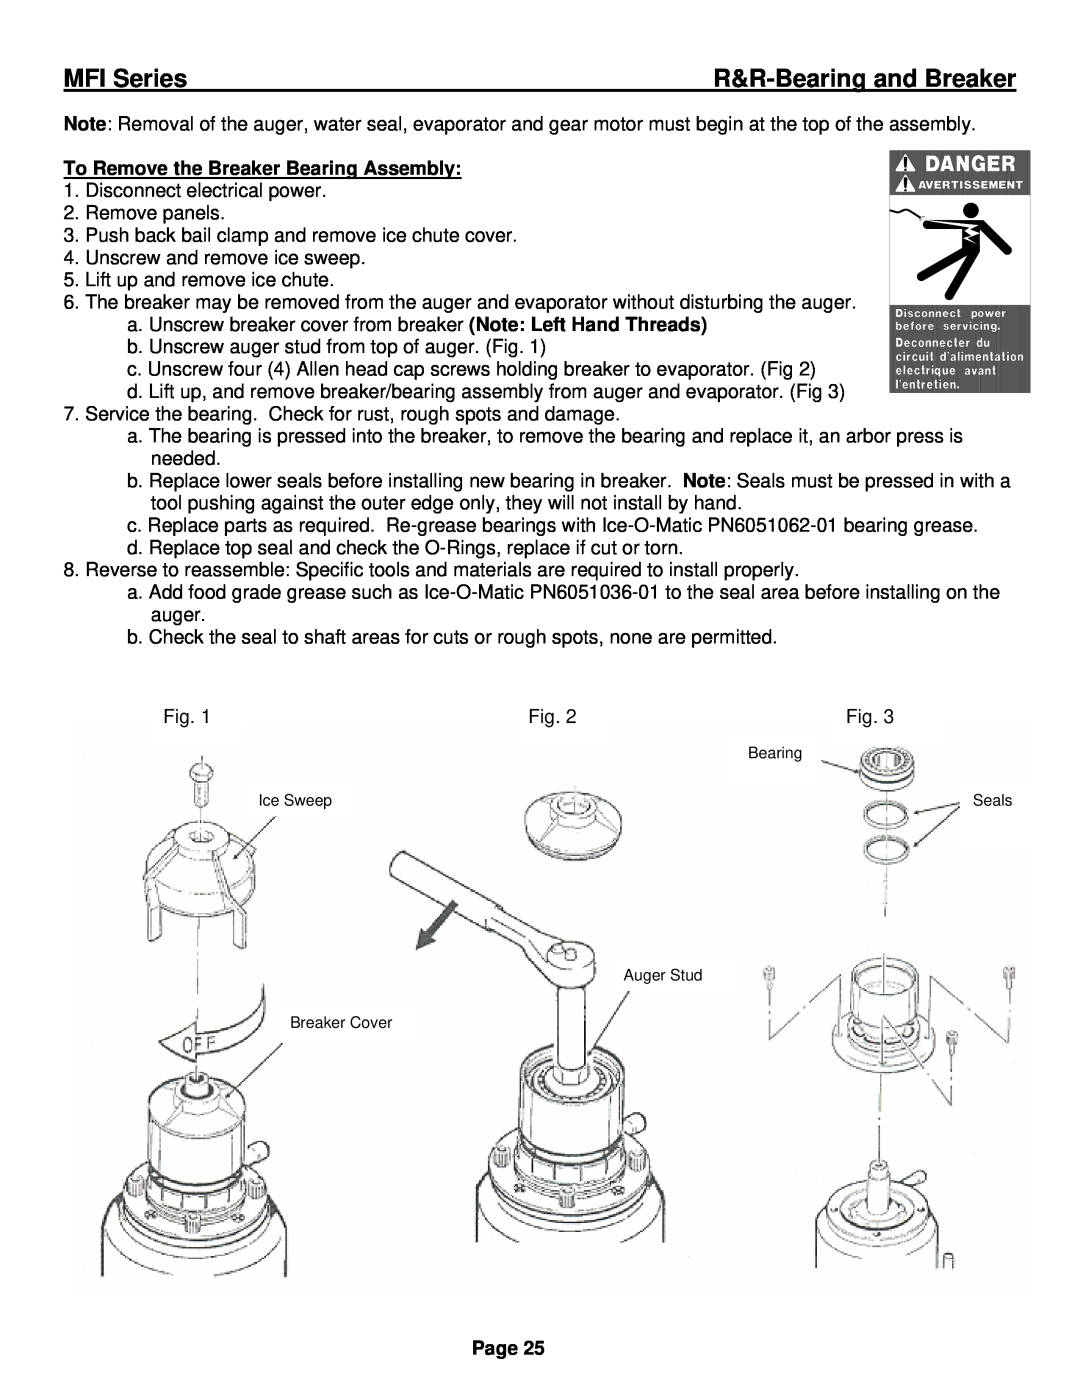 Ice-O-Matic installation manual R&R-Bearingand Breaker, To Remove the Breaker Bearing Assembly, MFI Series, Page 